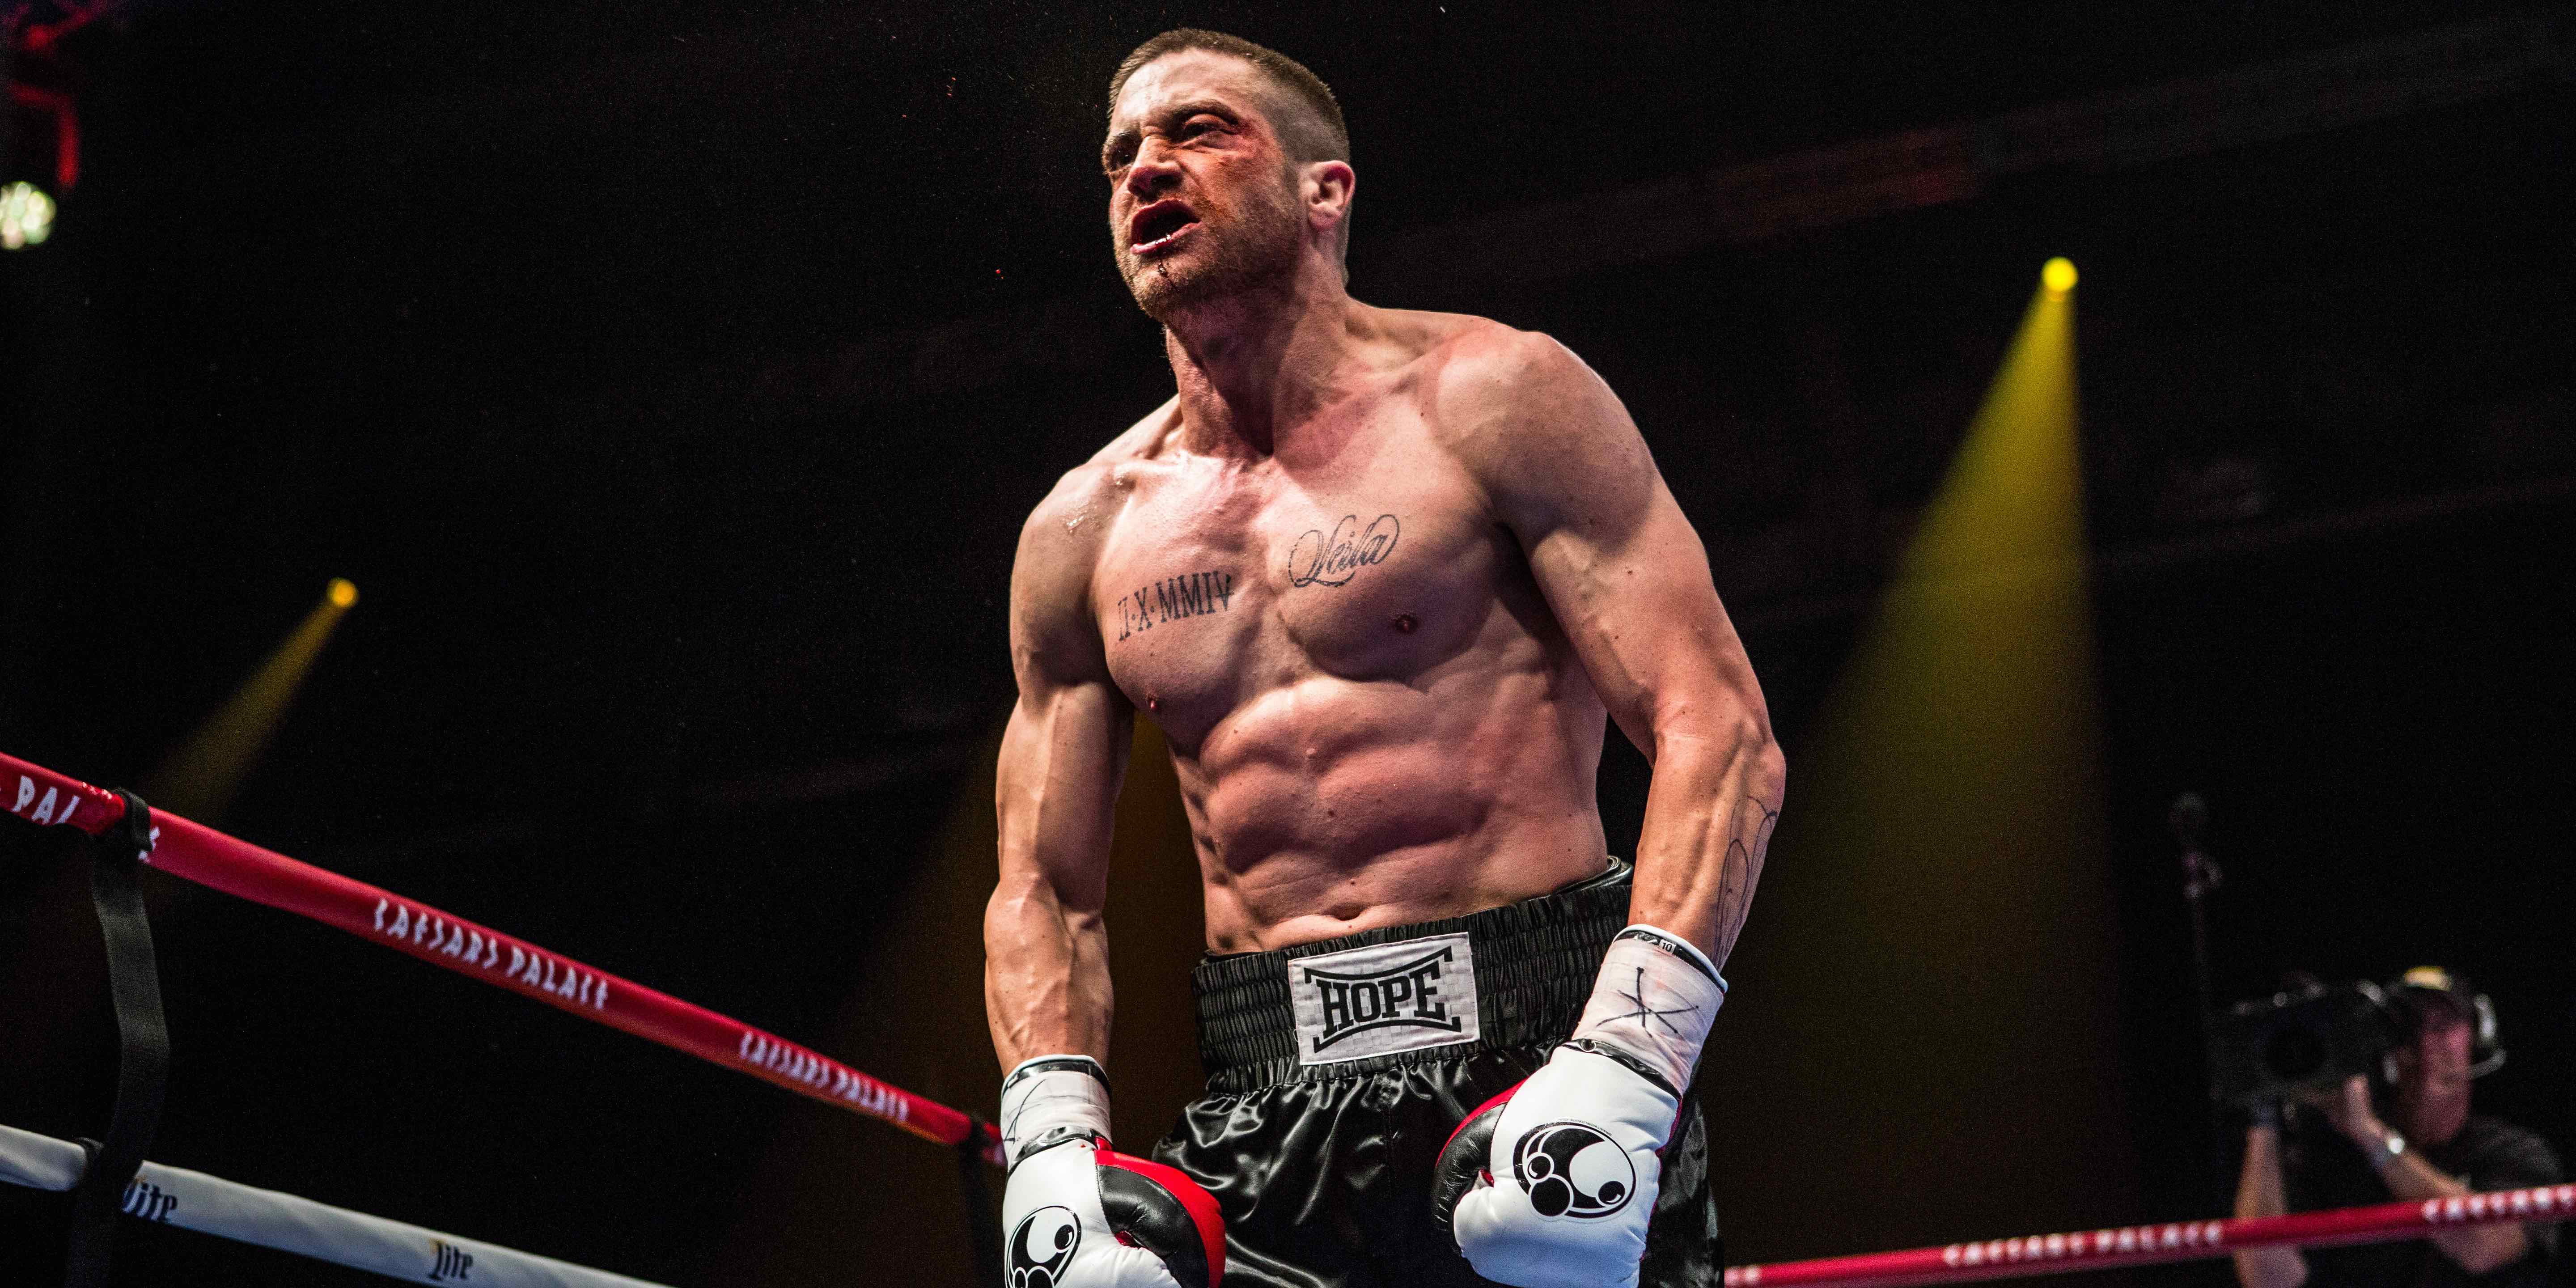 new-movie-southpaw-was-created-for-eminem-but-heres-why-the-role-ended-up-going-to-jake-gyllenhaal